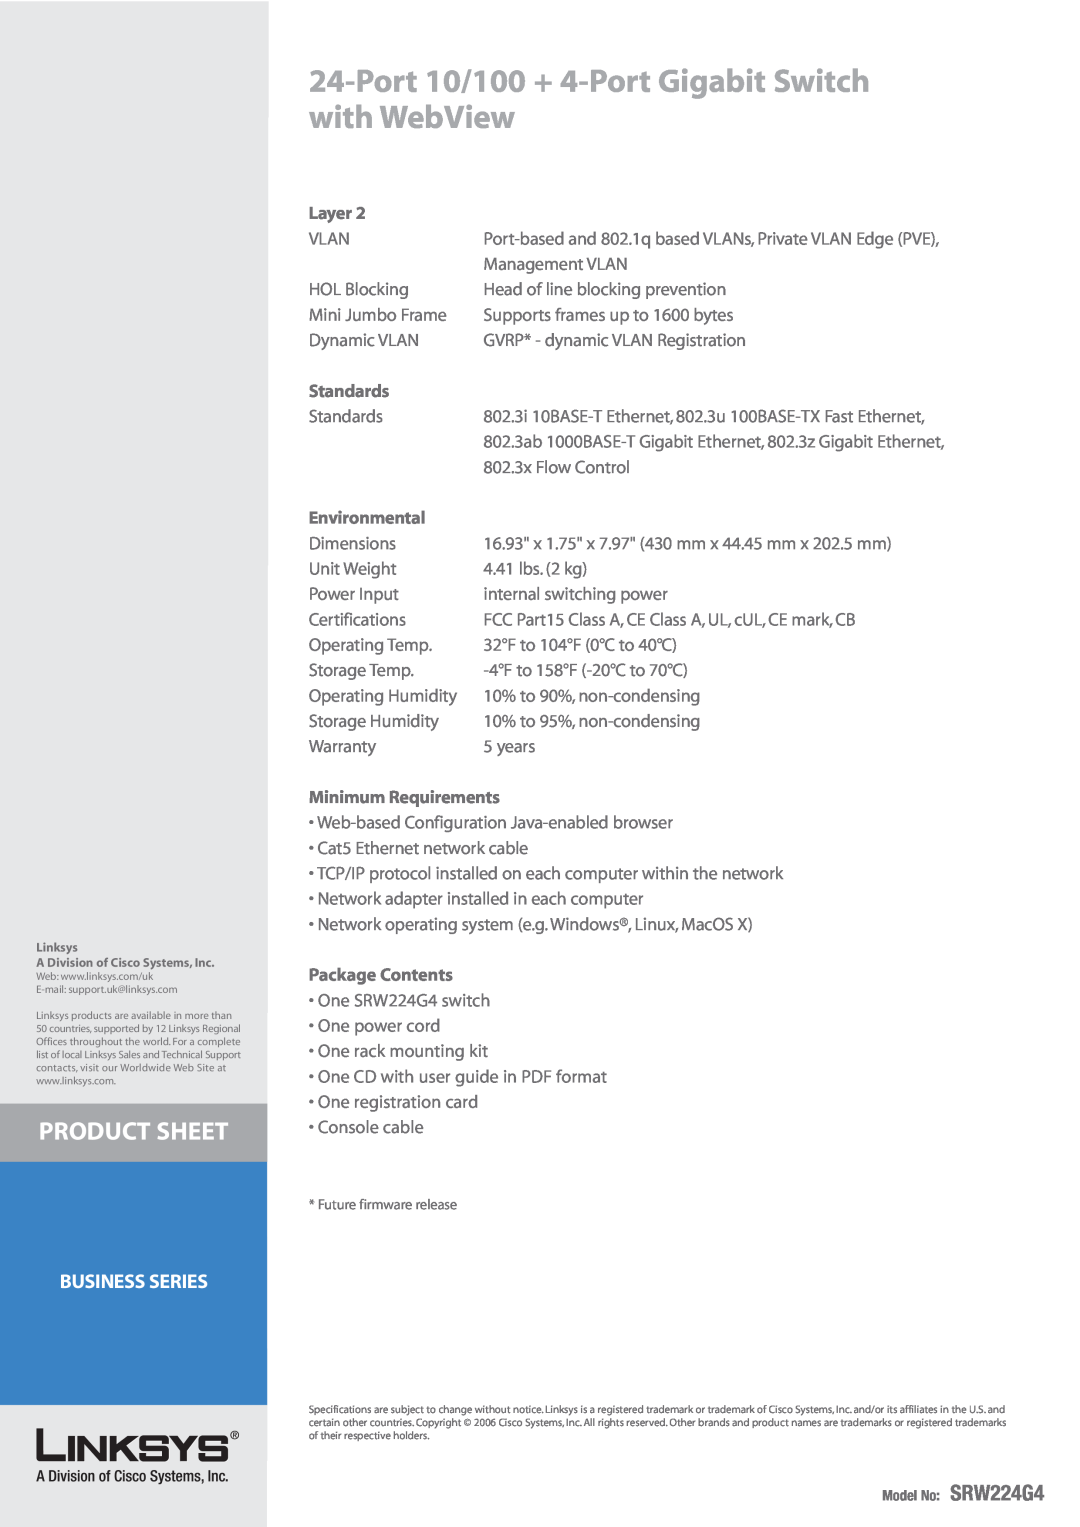 Cisco Systems SRW224G4 manual Layer, Standards, Environmental, Minimum Requirements, Package Contents, Product Sheet 